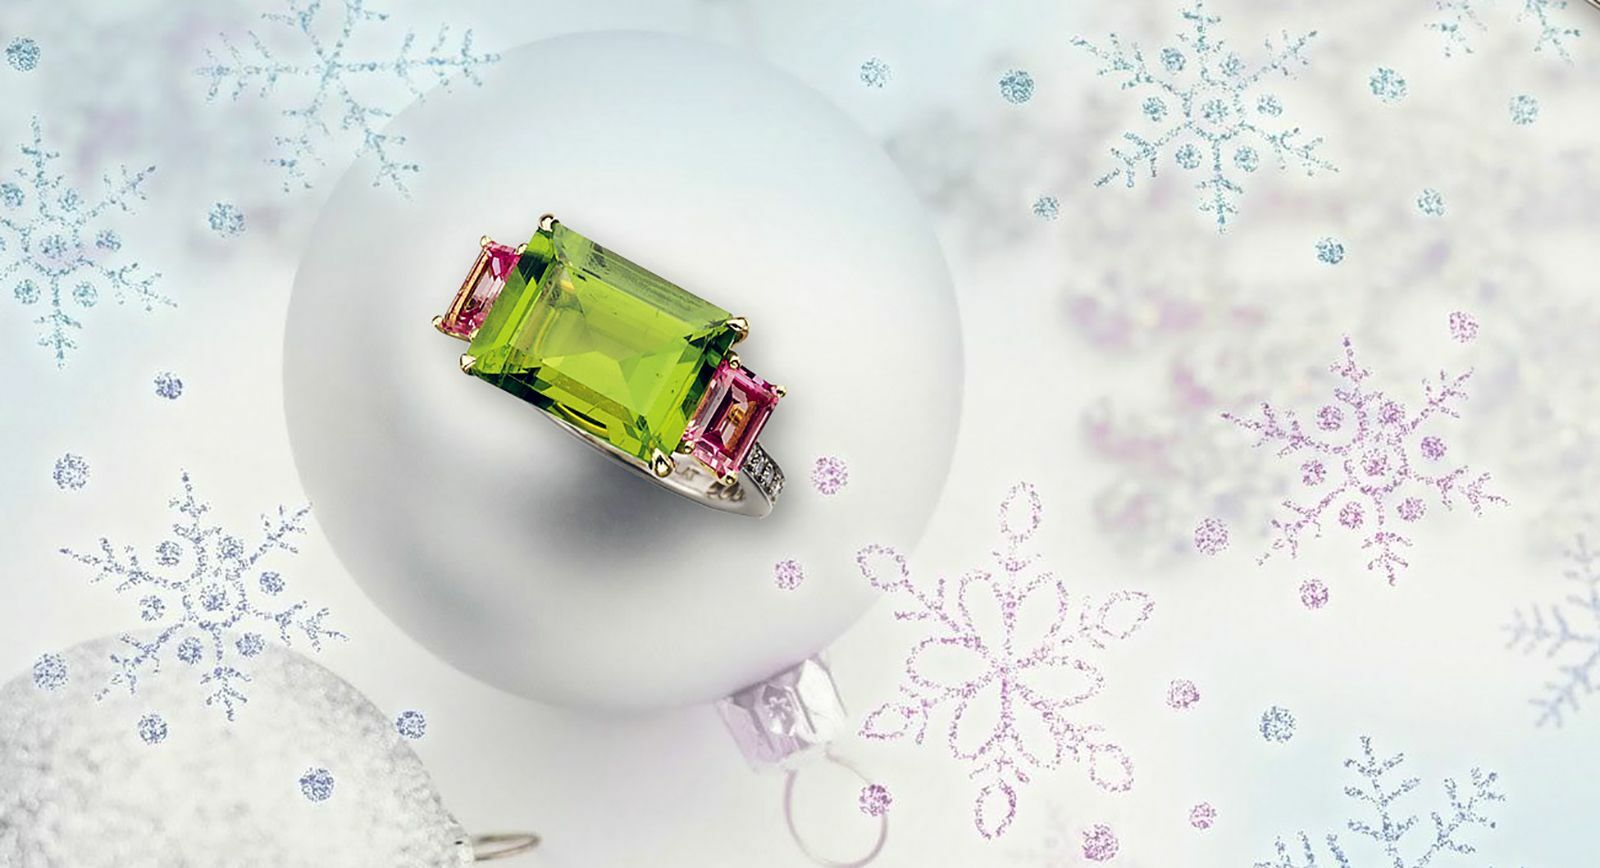 US Christmas Gifts Guide: Fine Jewellery under $7,000